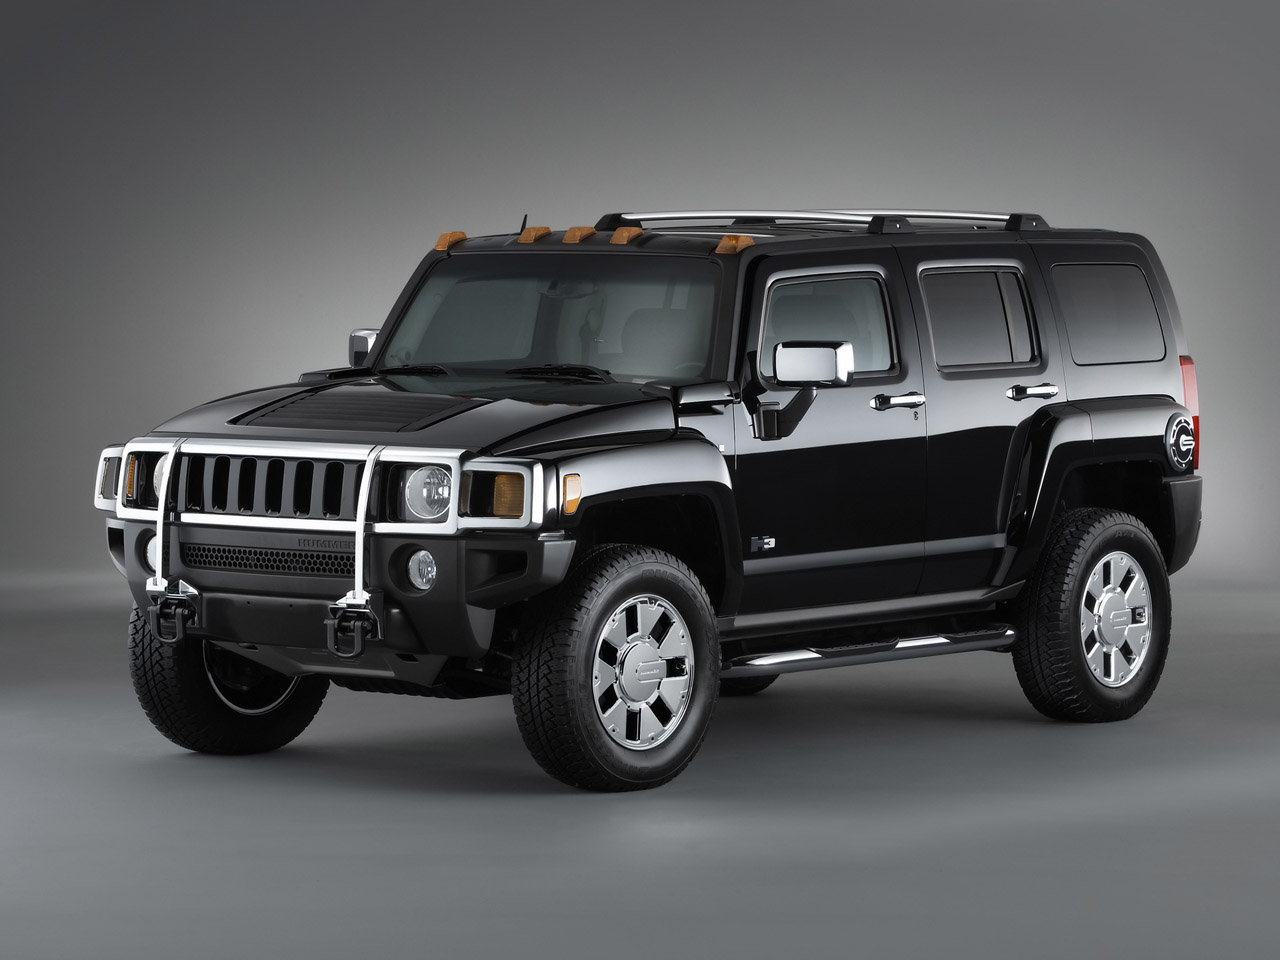 Hummer H3 Pics, Vehicles Collection